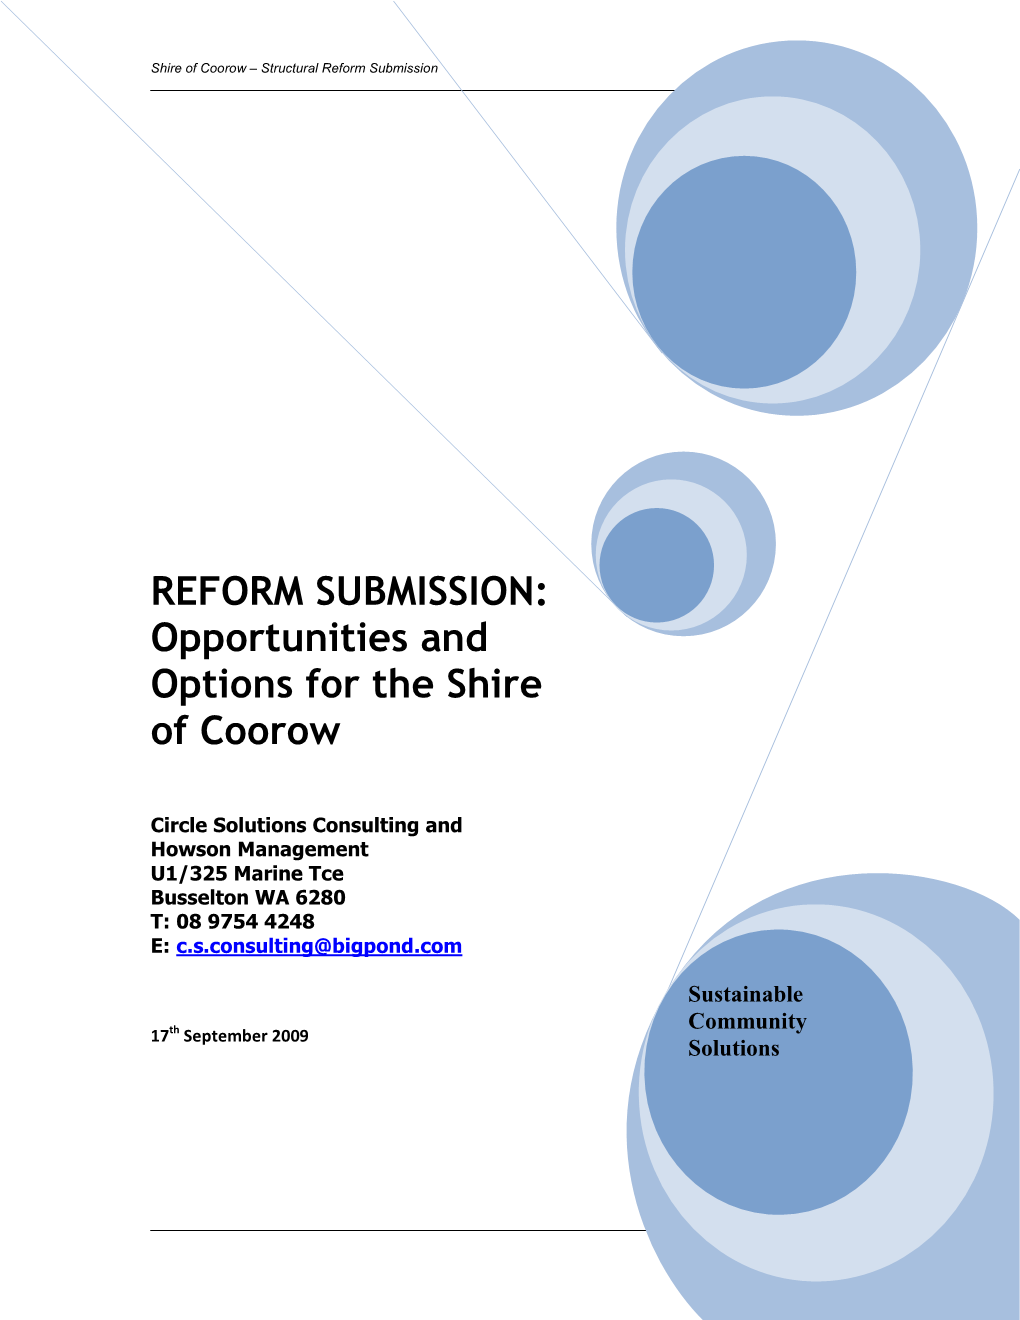 REFORM SUBMISSION: Opportunities and Options for the Shire of Coorow